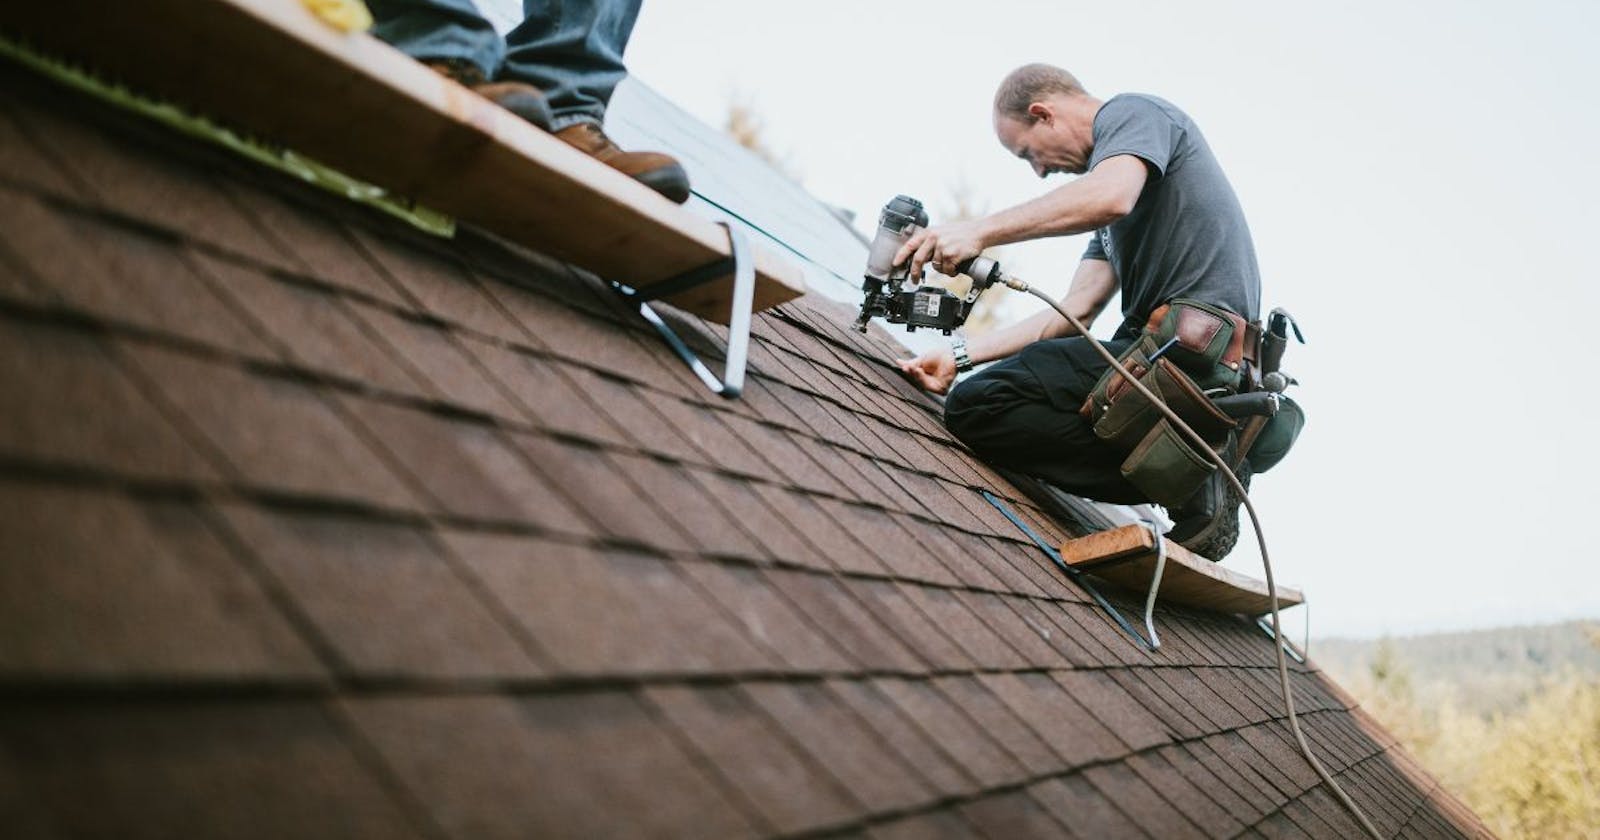 Roof Masters Residential Roofing Company: Your Trusted Roofing Experts